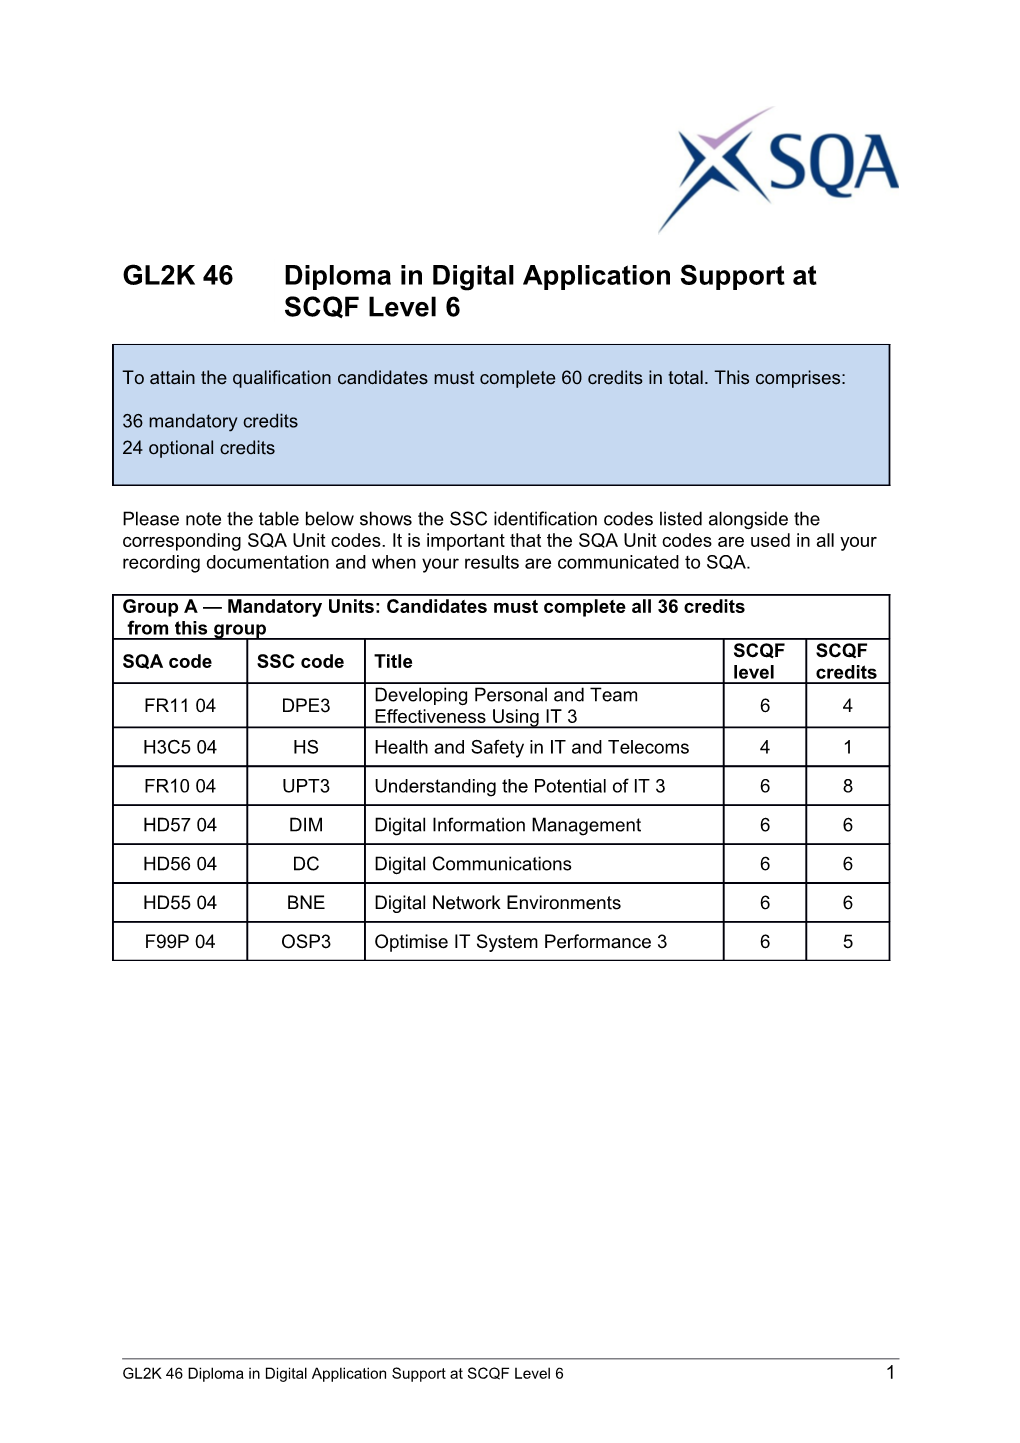 GL2K 46 Diploma in Digital Application Support at SCQF Level 61